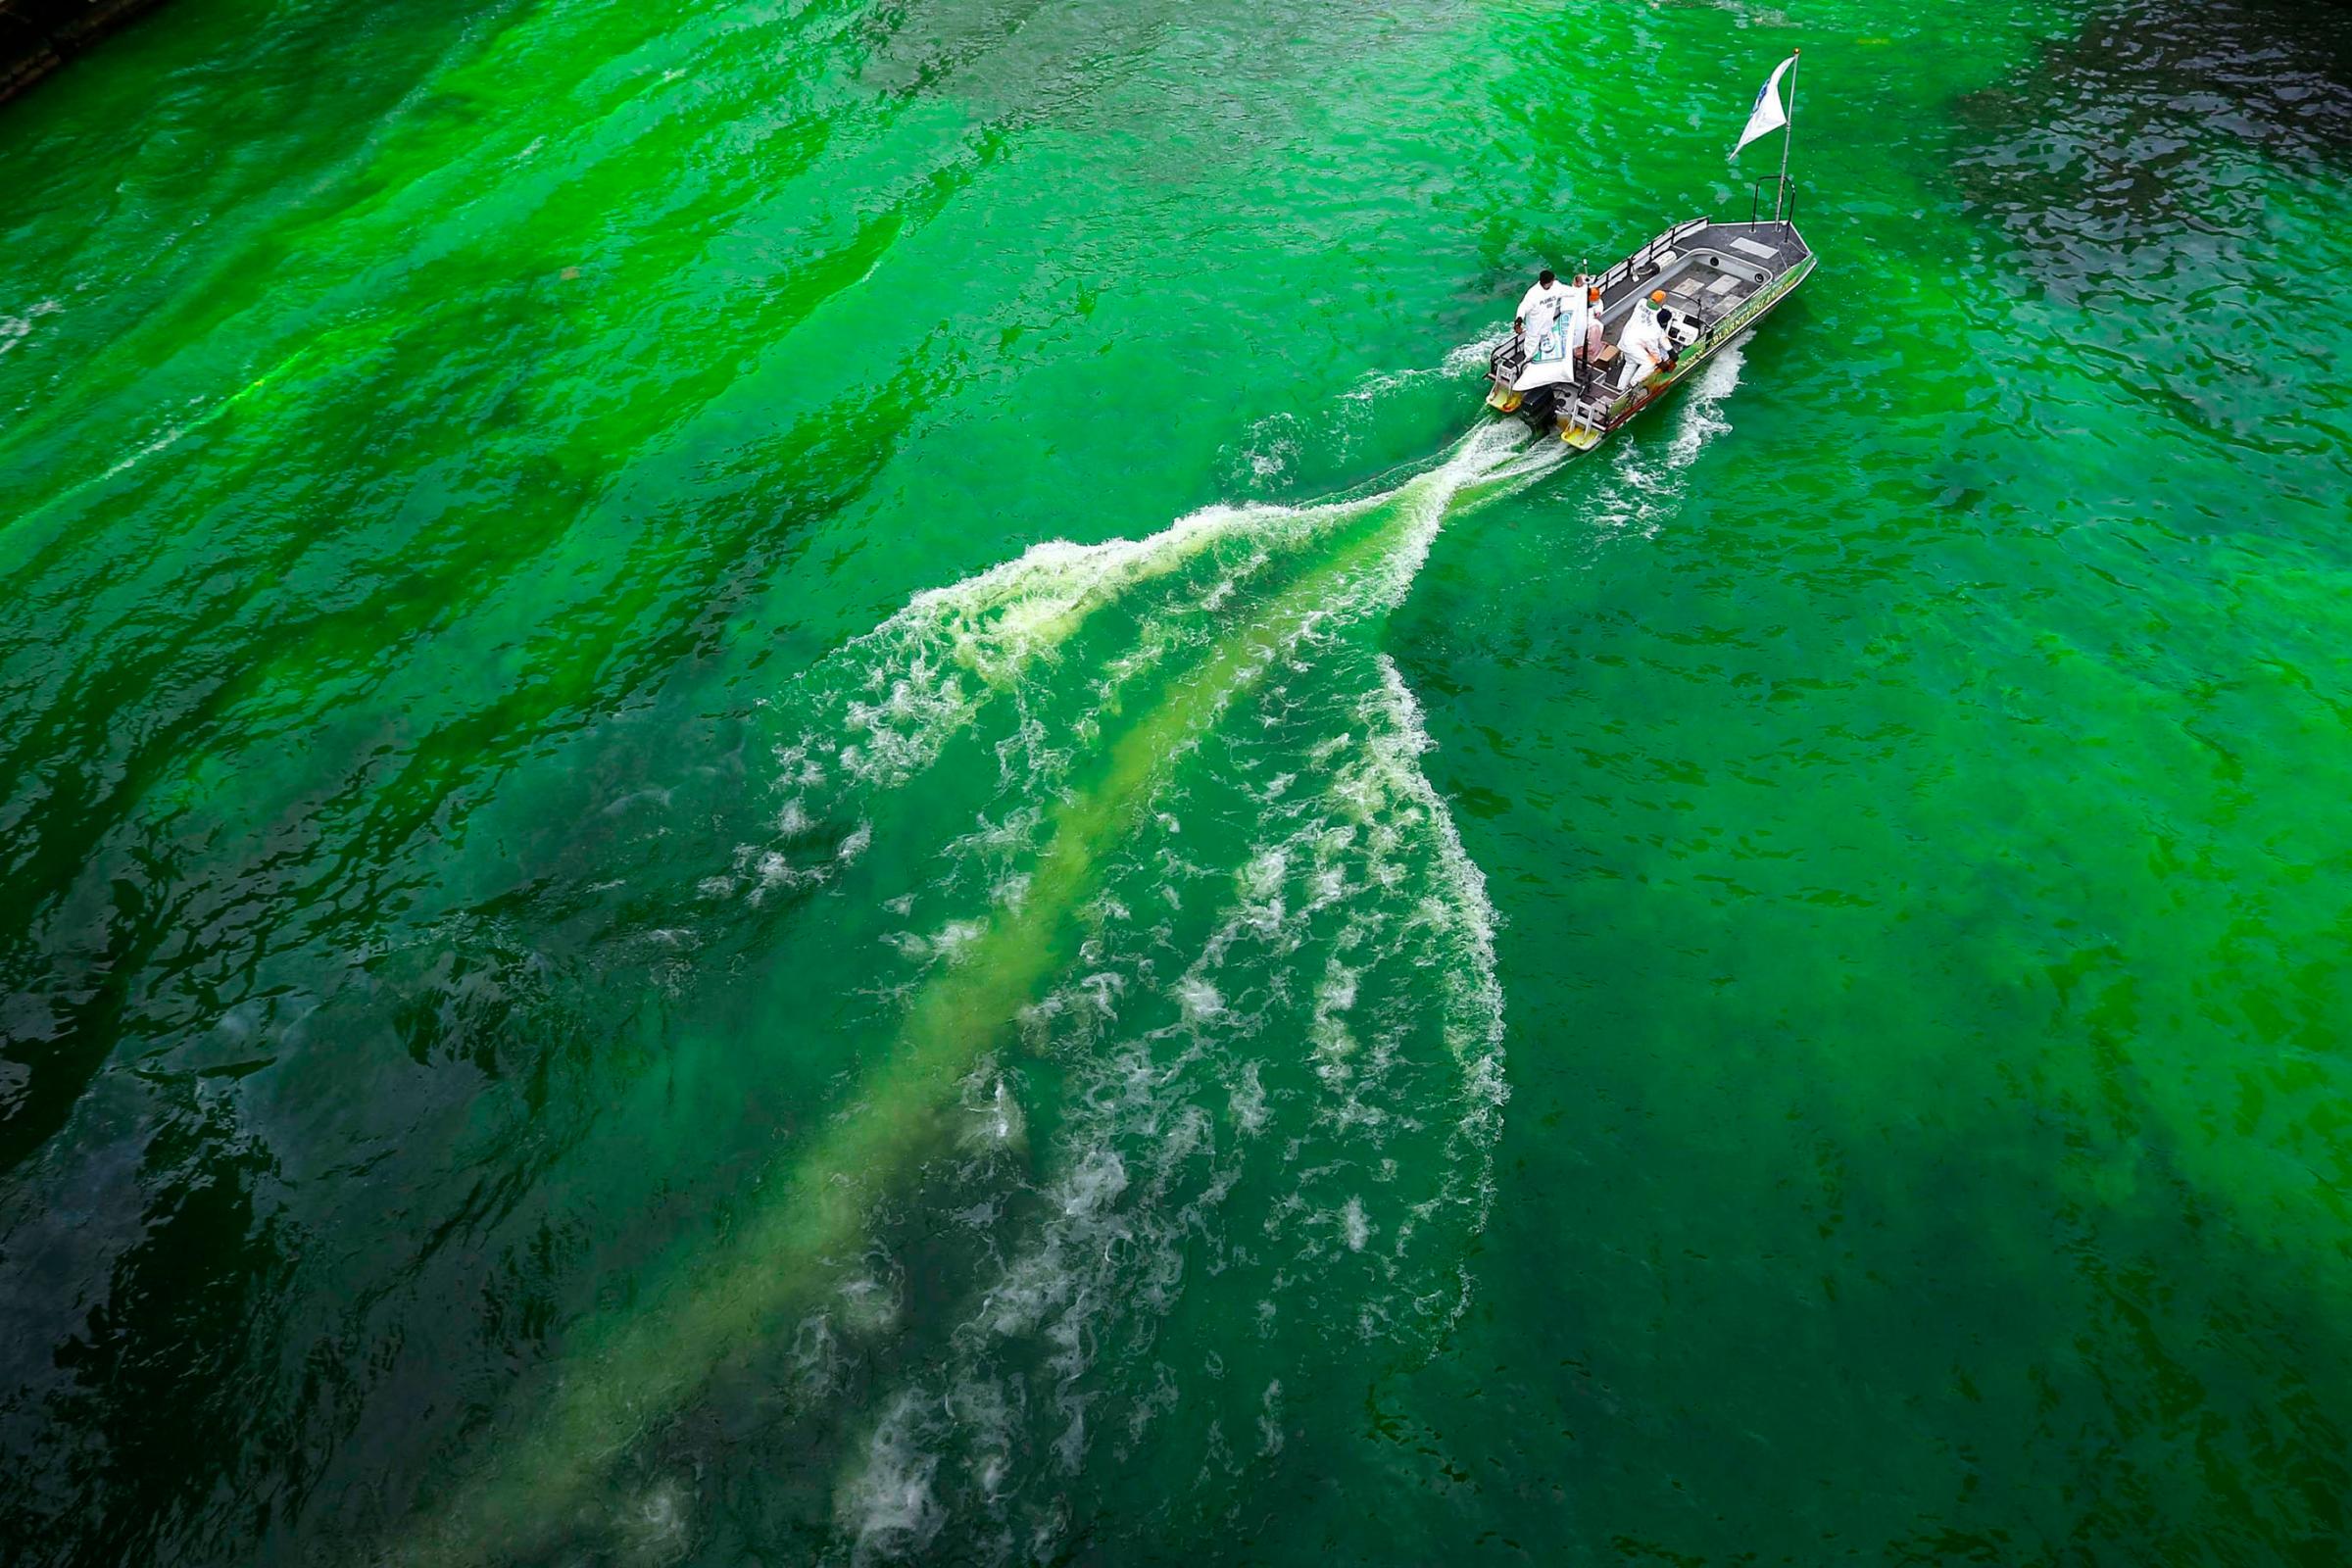 The Chicago River is dyed green in celebration of St. Patrick's Day in Chicago, March 15, 2014.